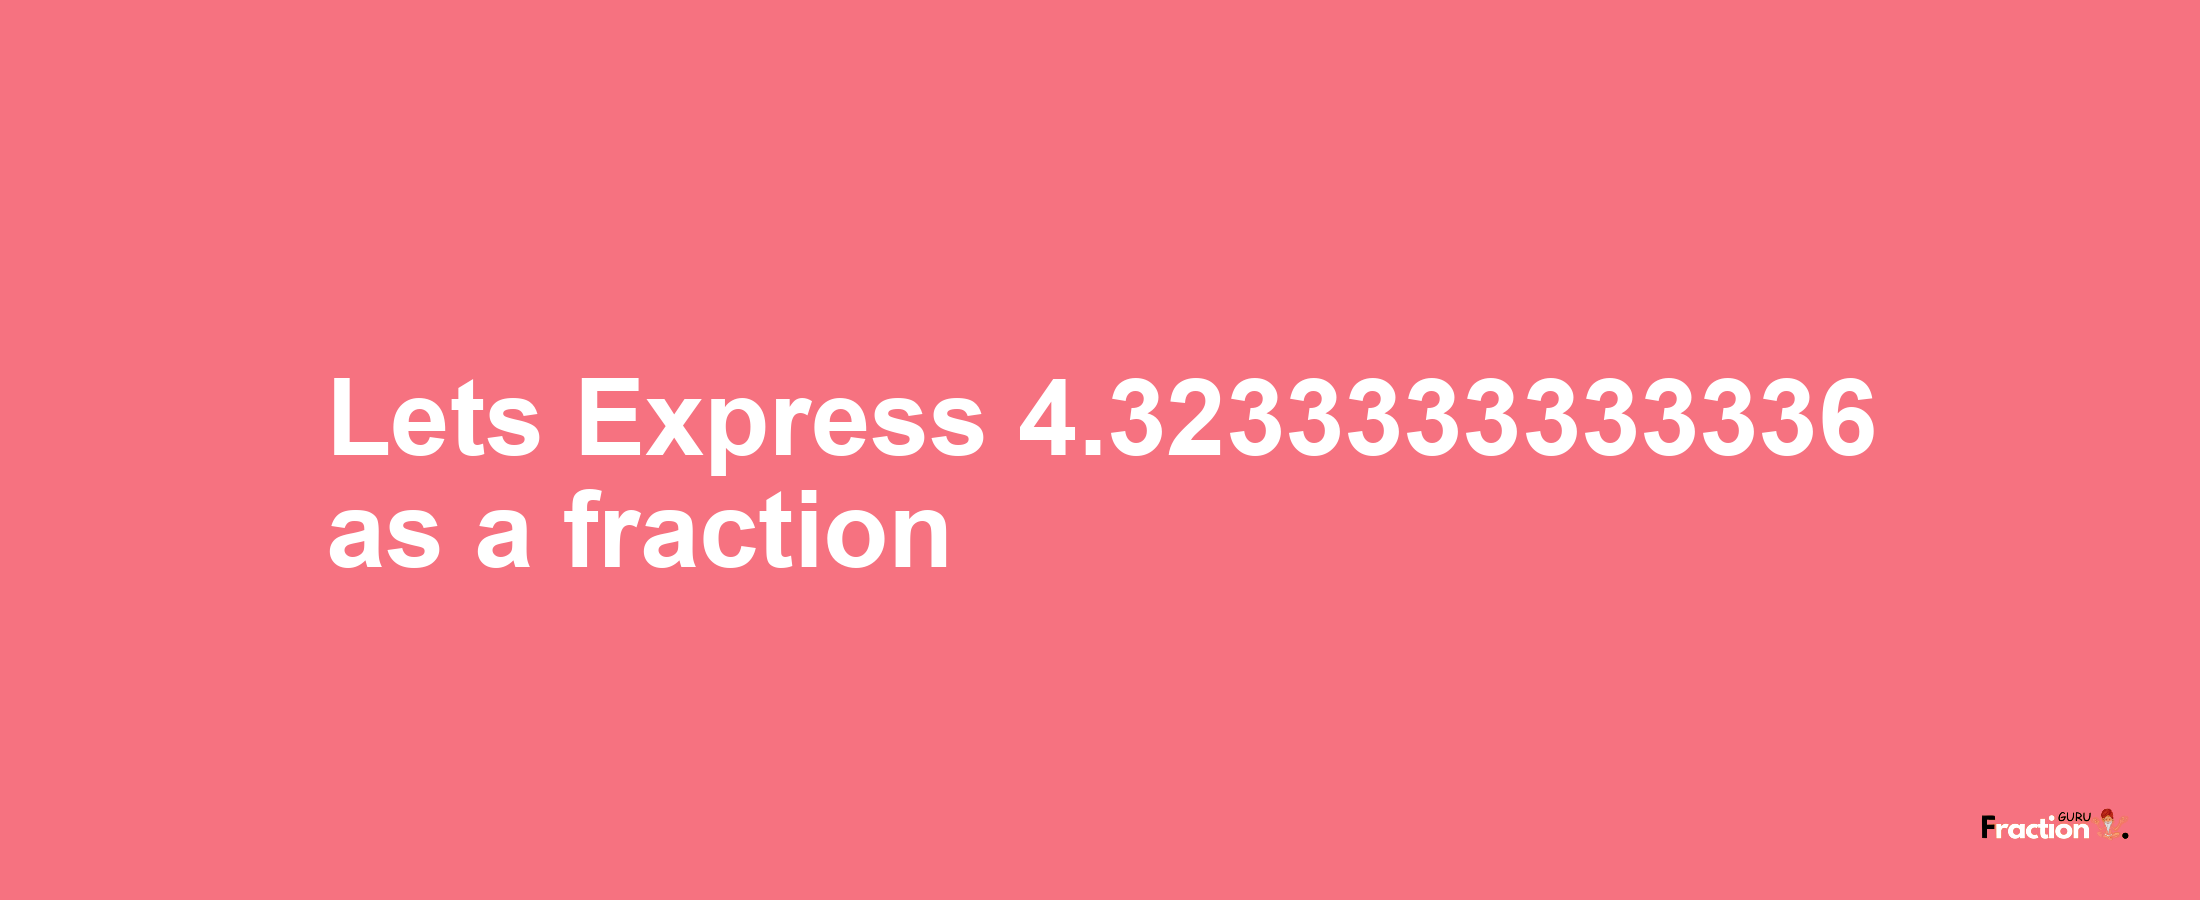 Lets Express 4.3233333333336 as afraction